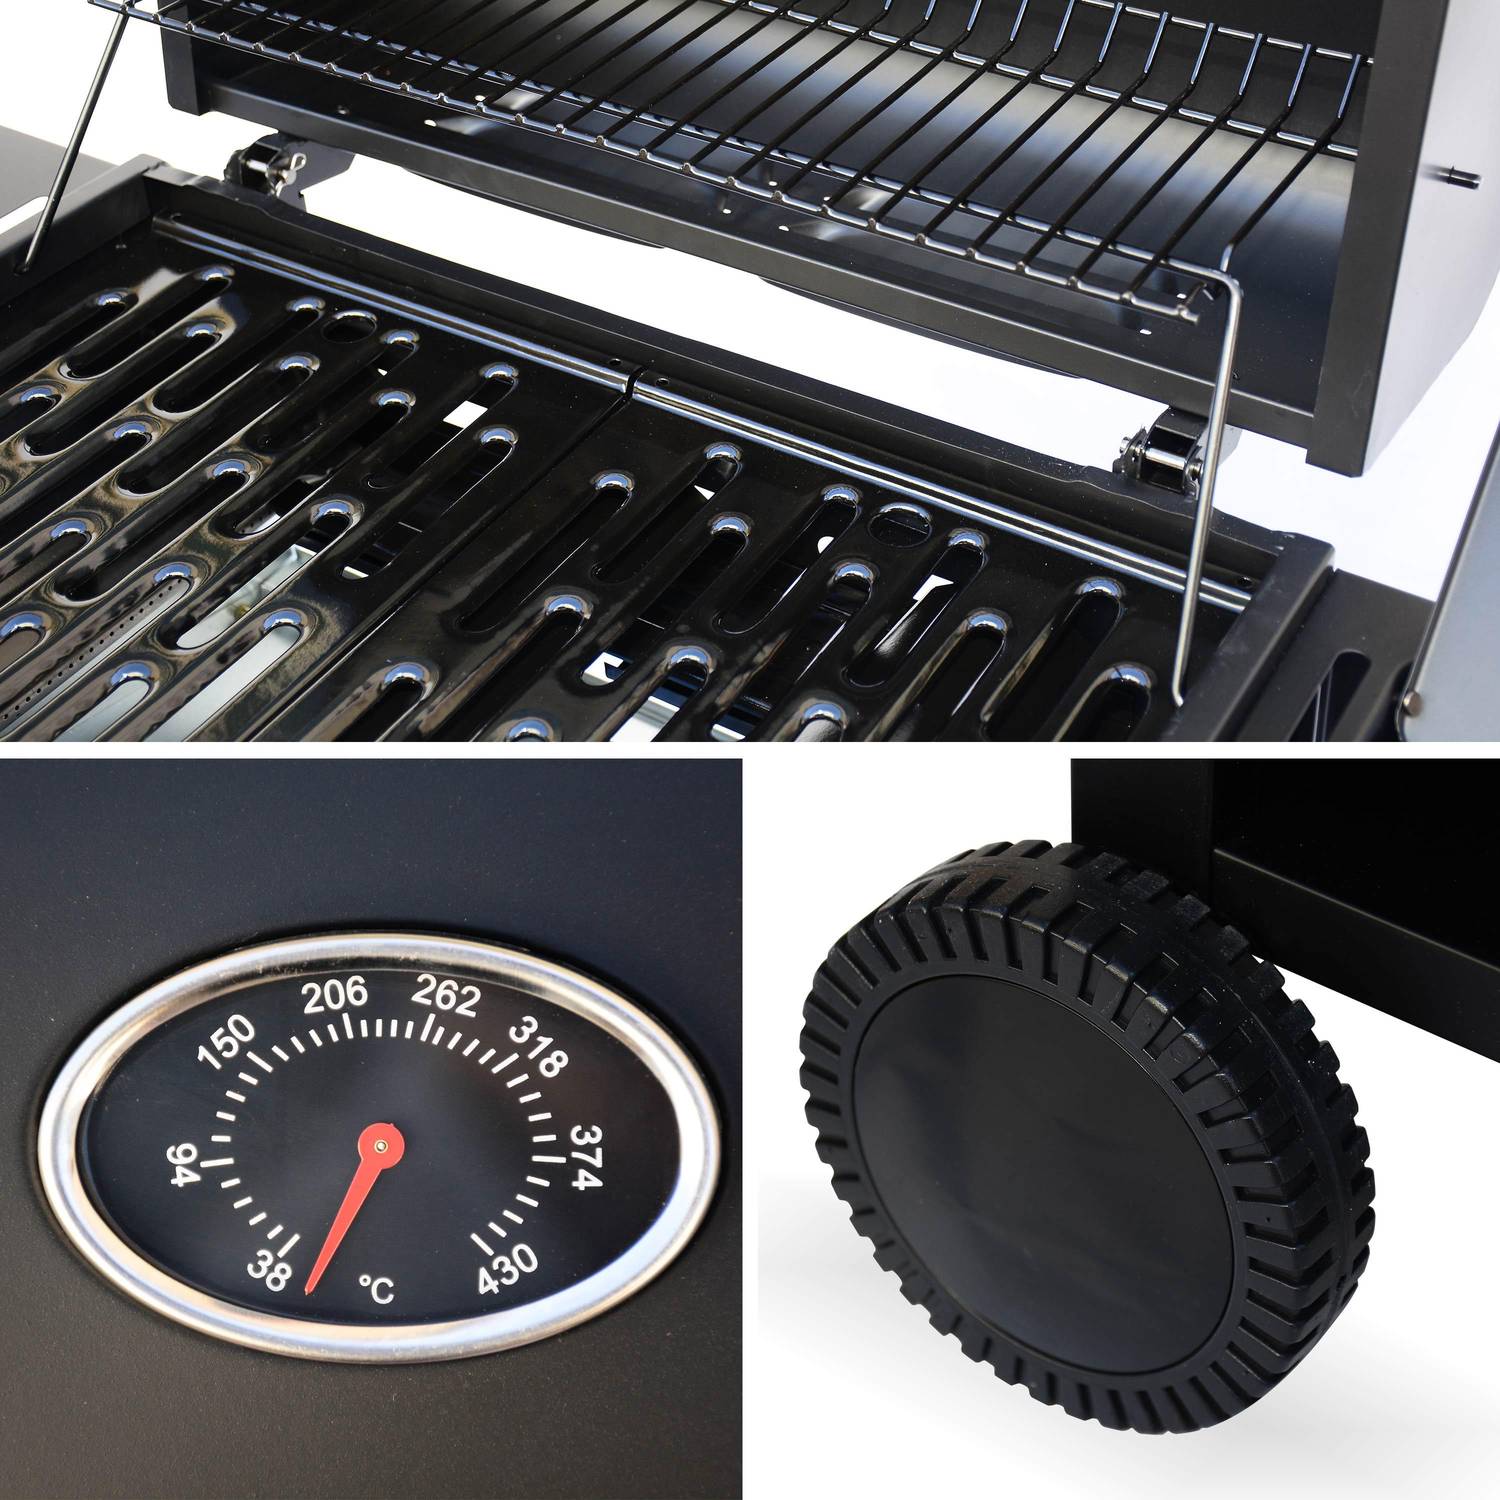 Gas barbecue - Treville - Barbecue 3 burners + 1 black side burner, with thermometer Photo3